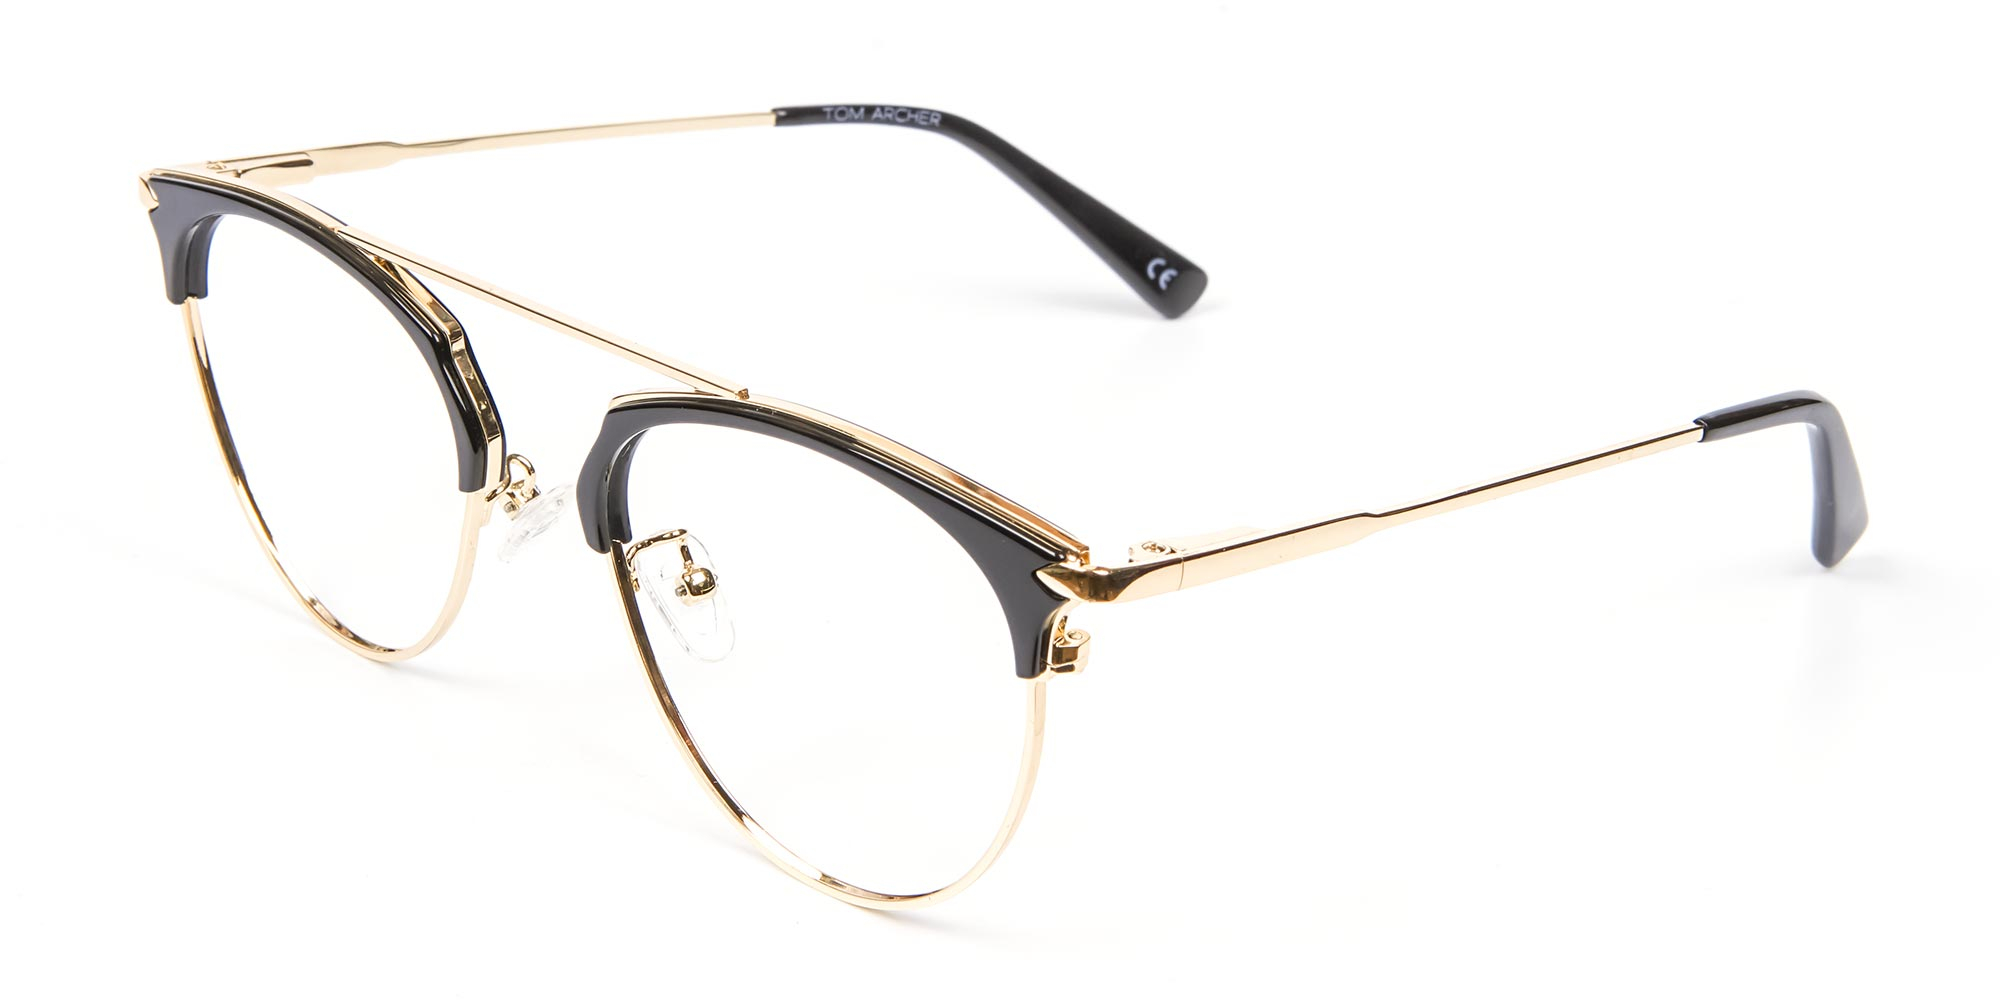 WILSON WS1 - Black and Gold No-Nose Bridged Glasses | Specscart.®